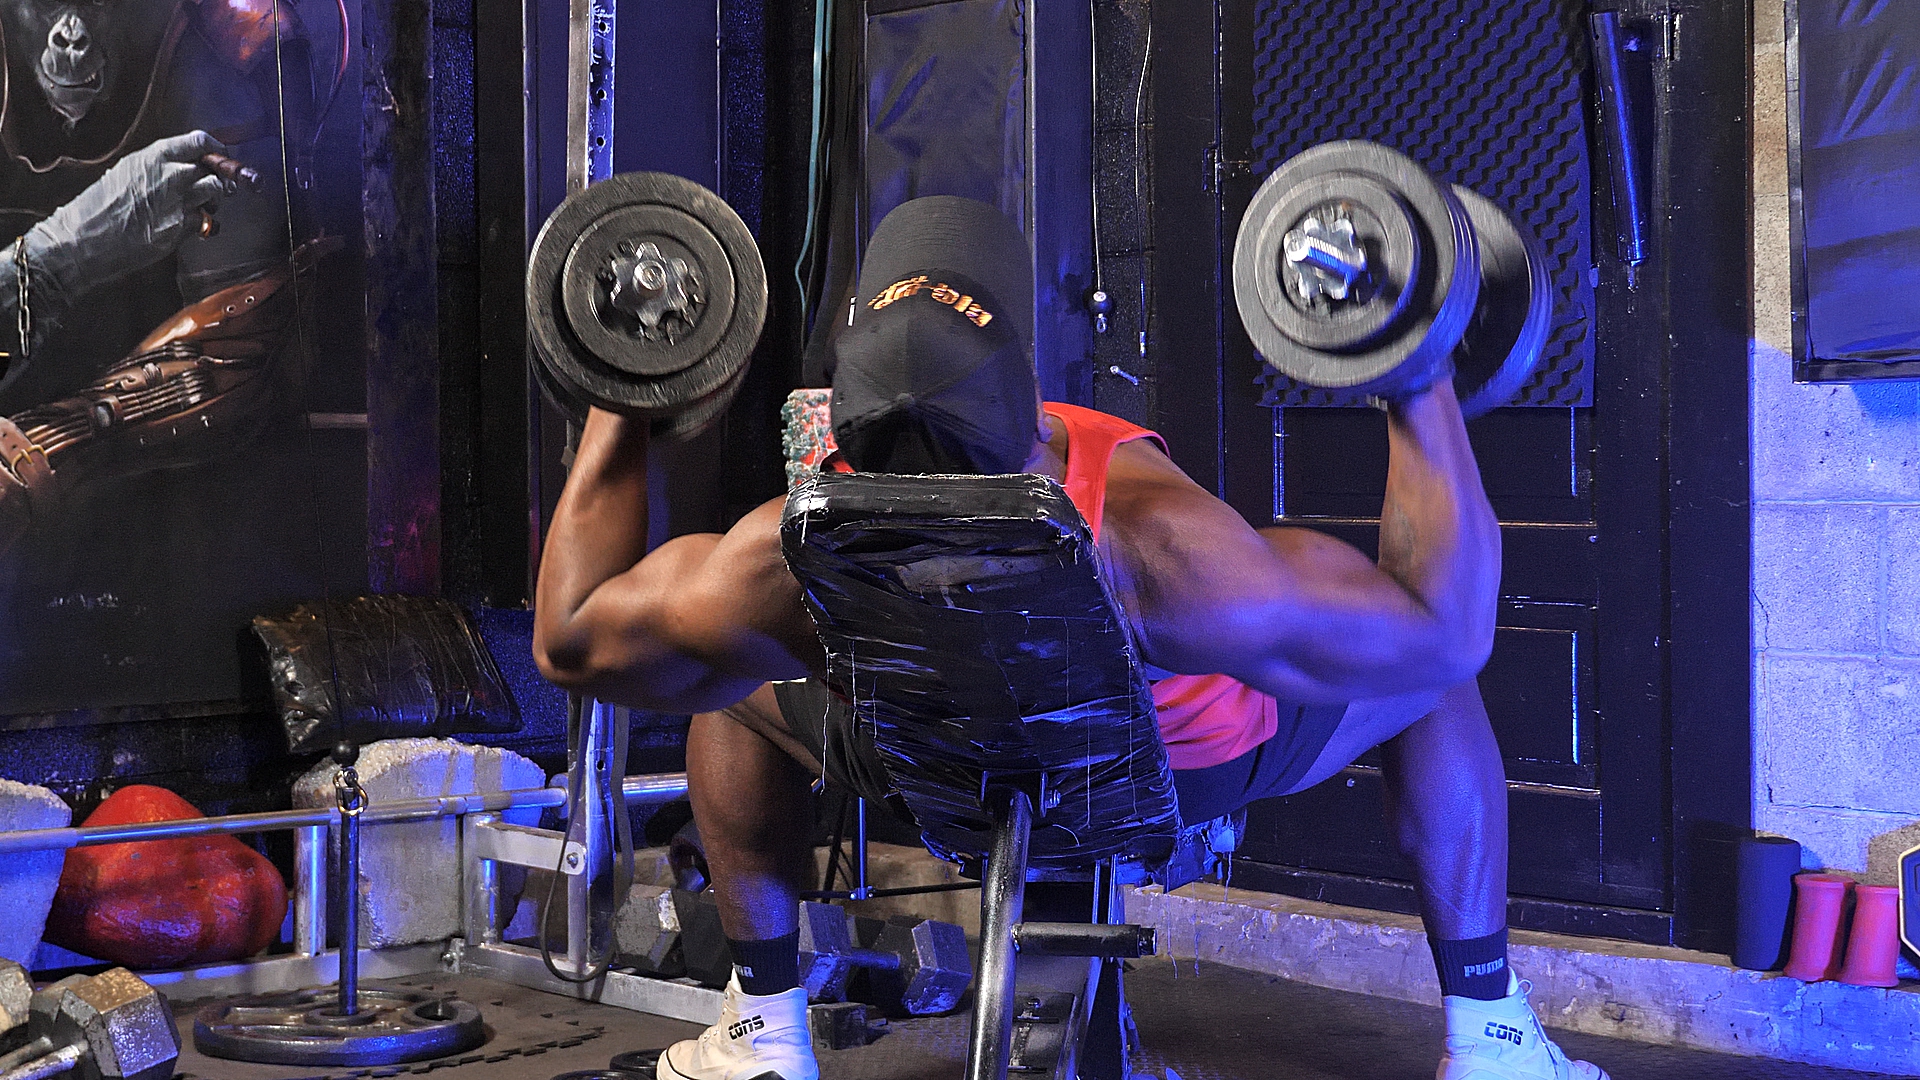 Building Chest and Triceps With Dumbbells